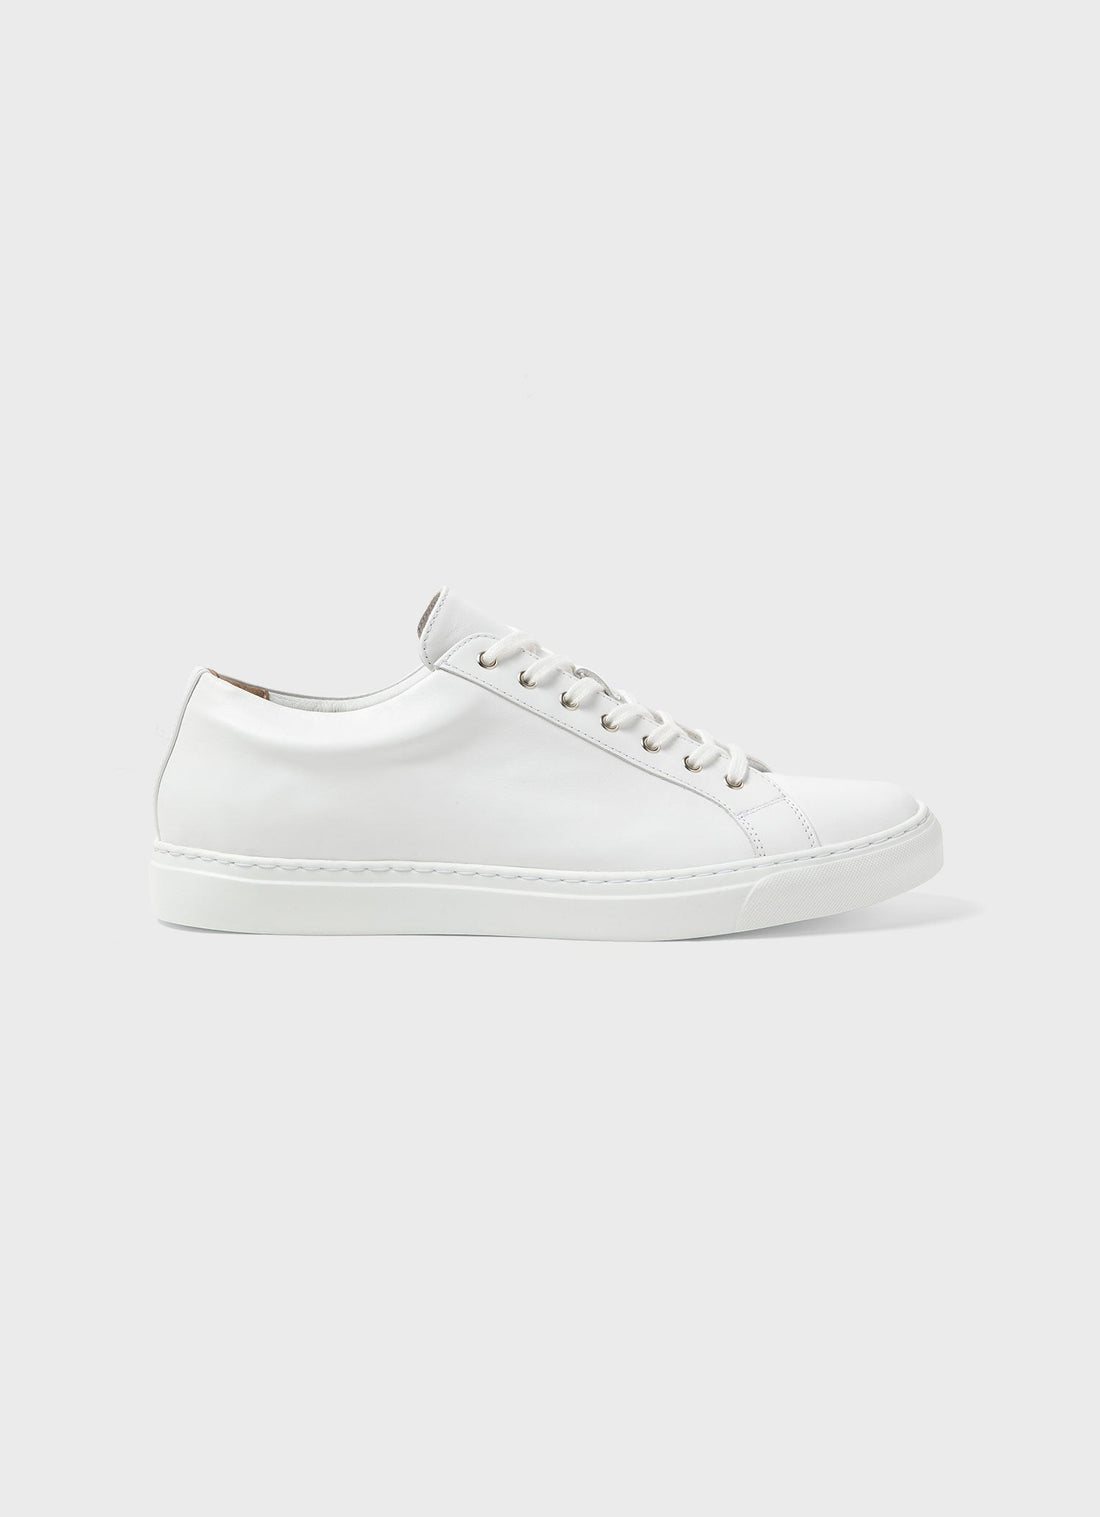 Men's Leather Tennis Shoes in White